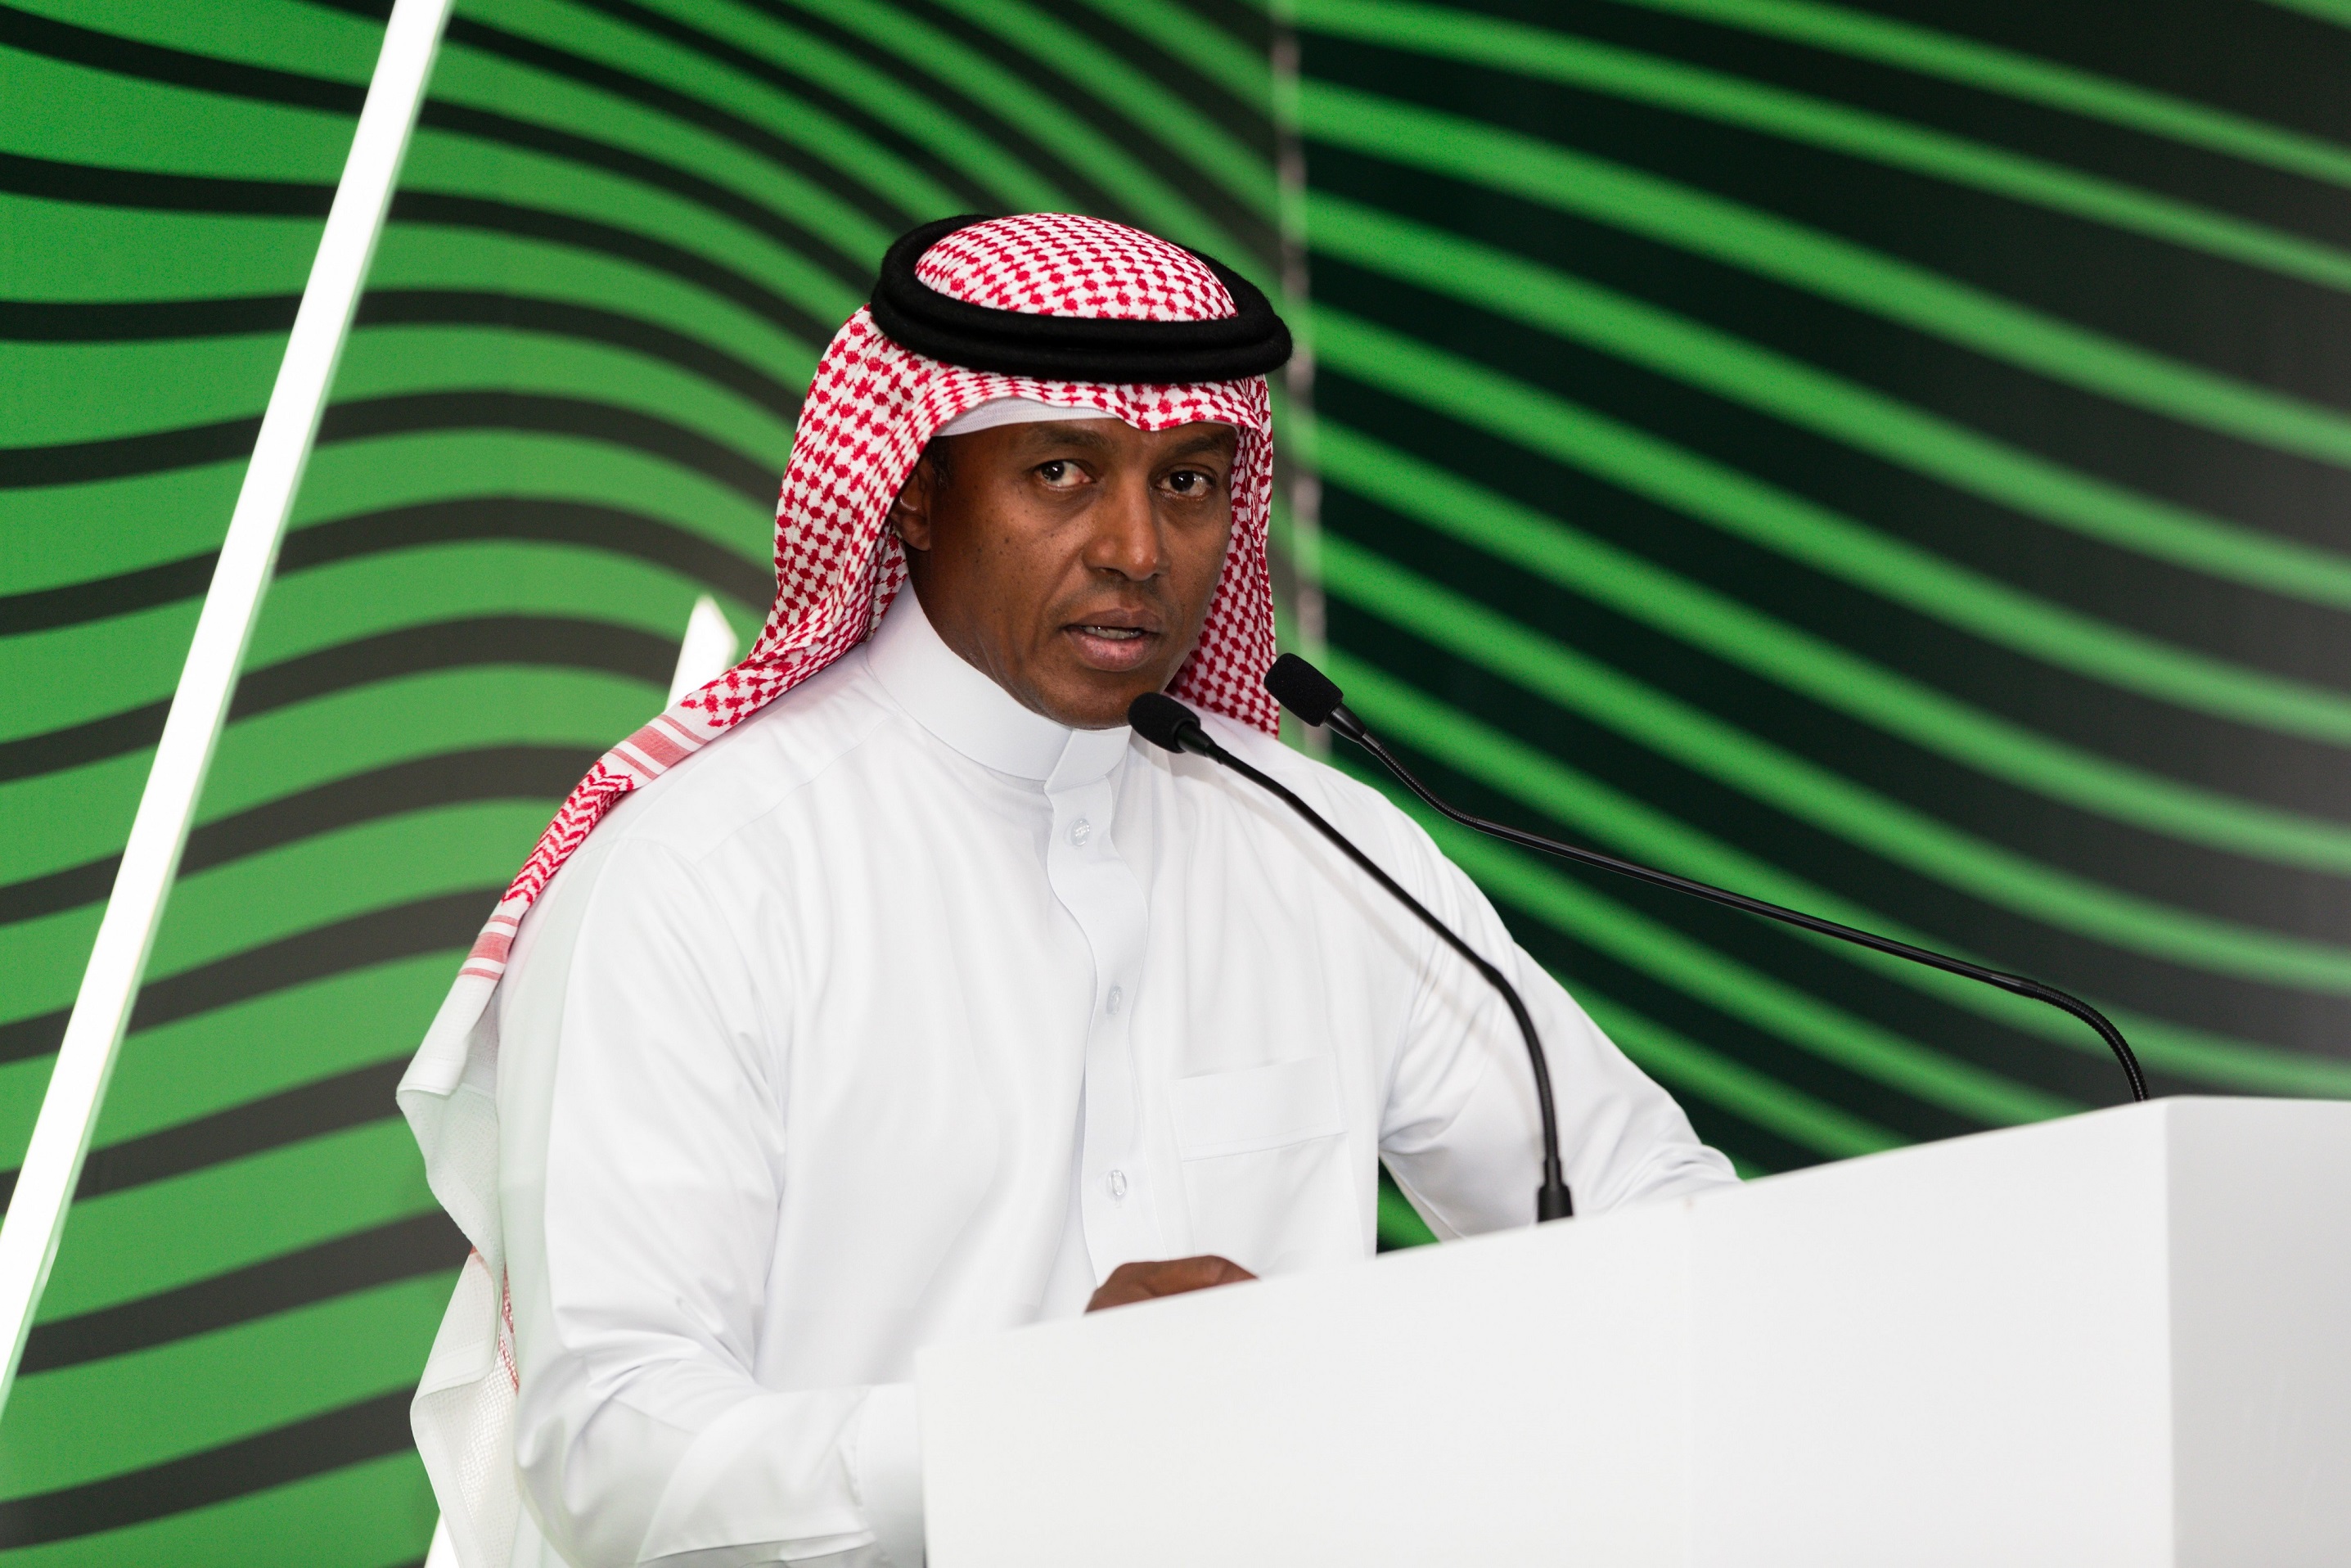 Golf Saudi CEO: We will be golf's most dynamic market in a decade